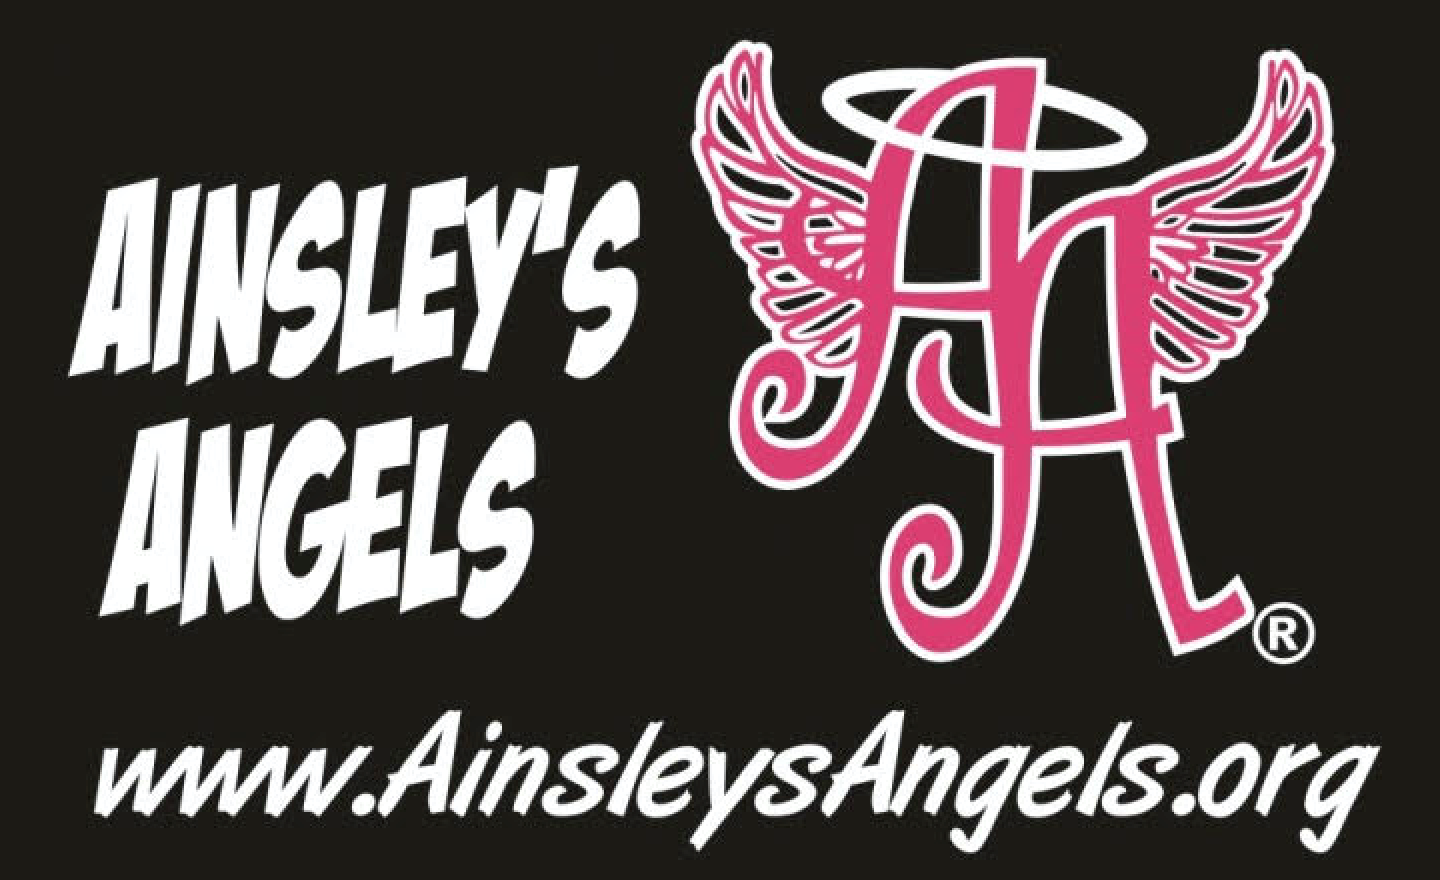 Hillbender Bike Race raises funds to buy a trailer for Ainsley’s Angels Charriots.